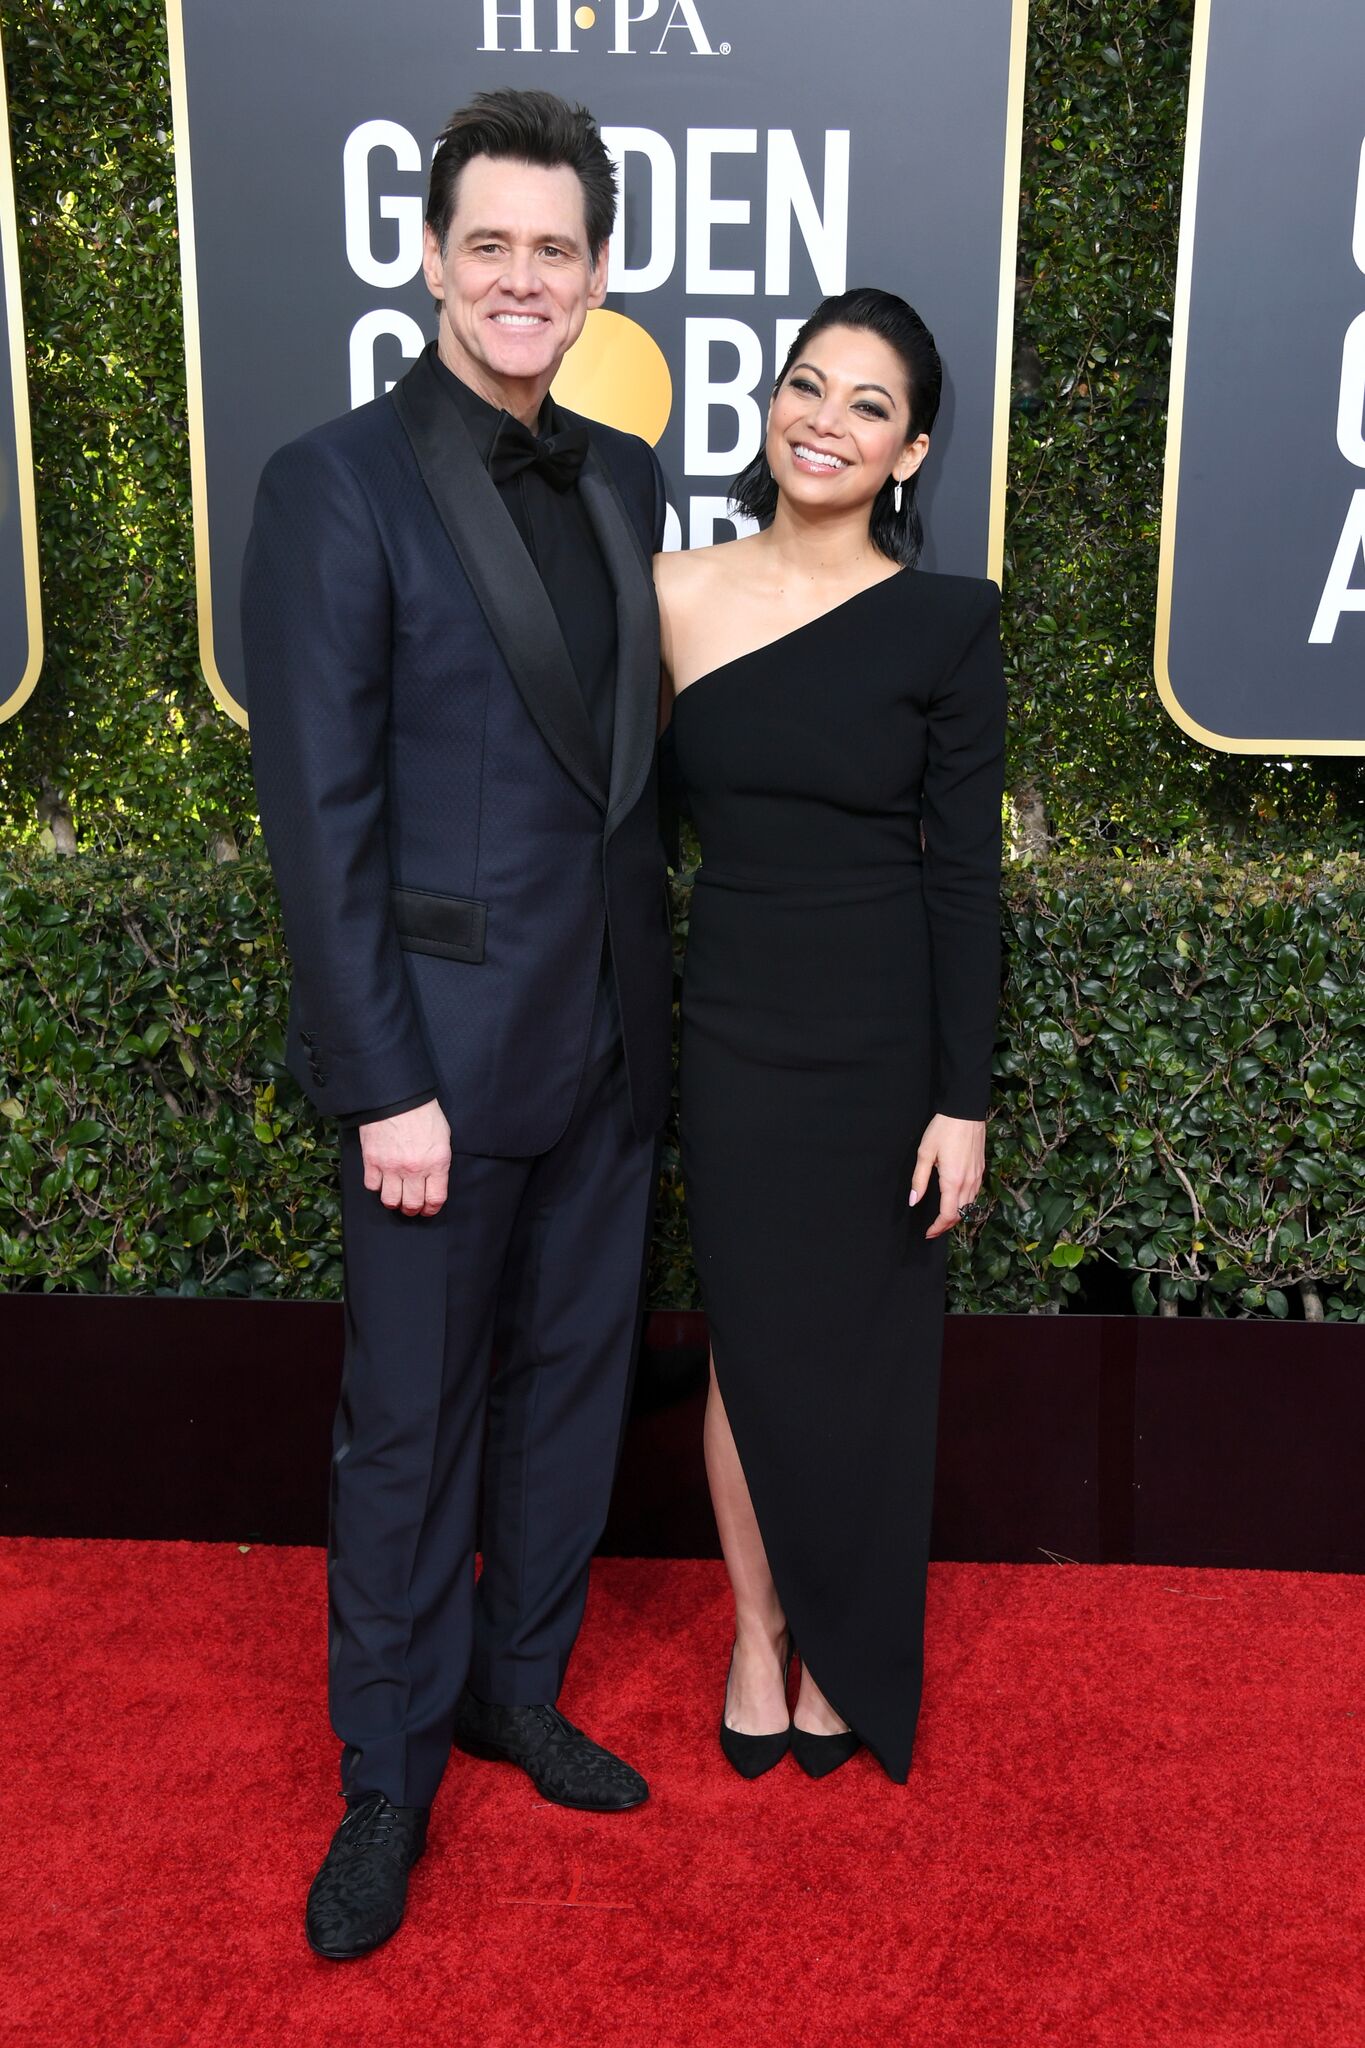 Jim Carrey and Ginger Gonzaga attend the 76th Annual Golden Globe Awards at The Beverly Hilton Hotel | Getty Images